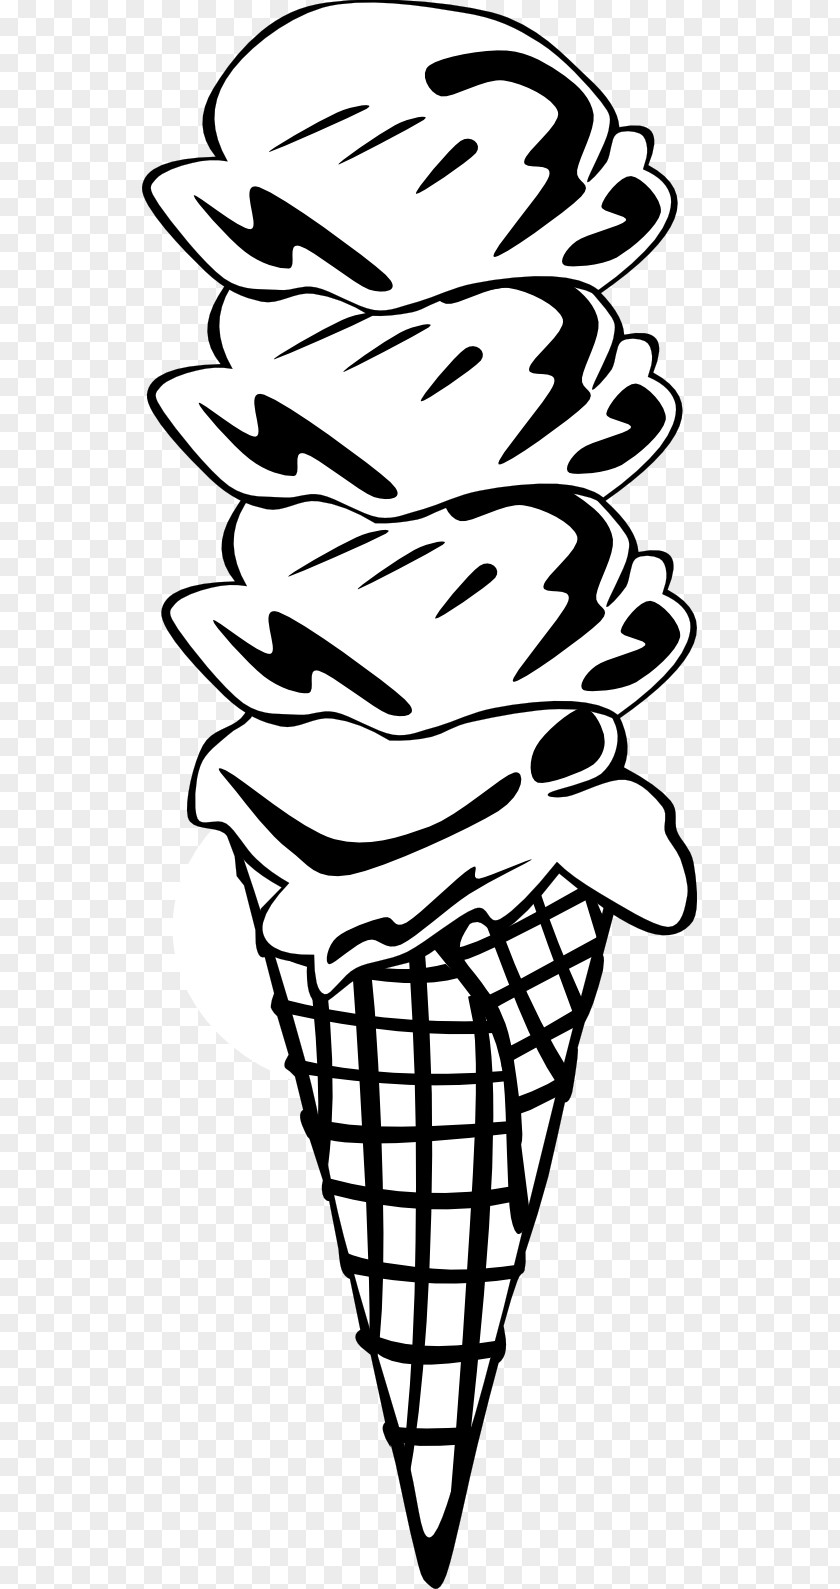 Gerald G Ice Cream Cones Chocolate Waffle PNG